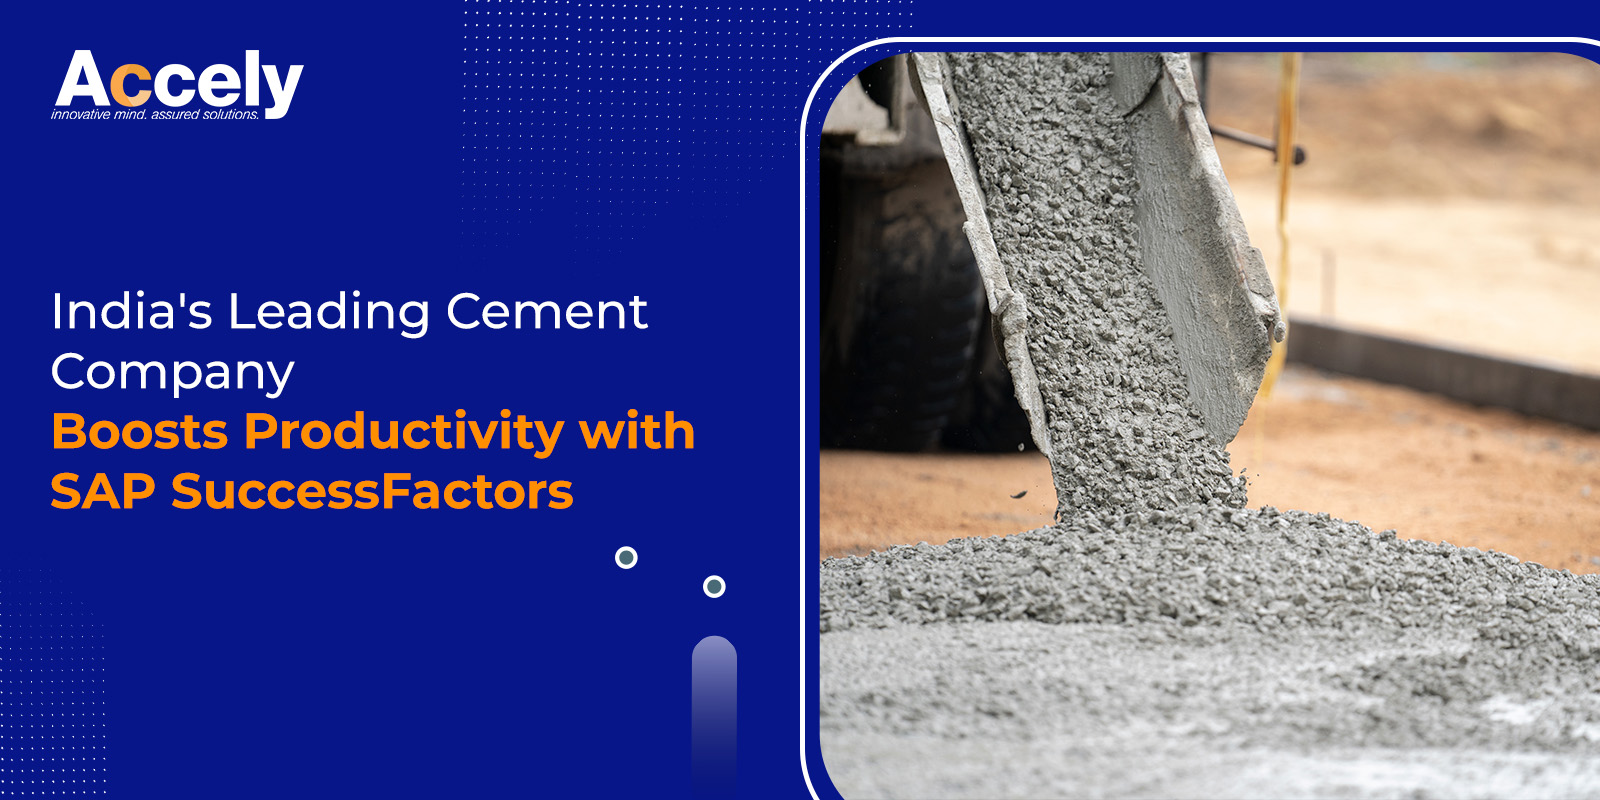 India's Leading Cement Company Boosts Productivity with SAP SuccessFactors